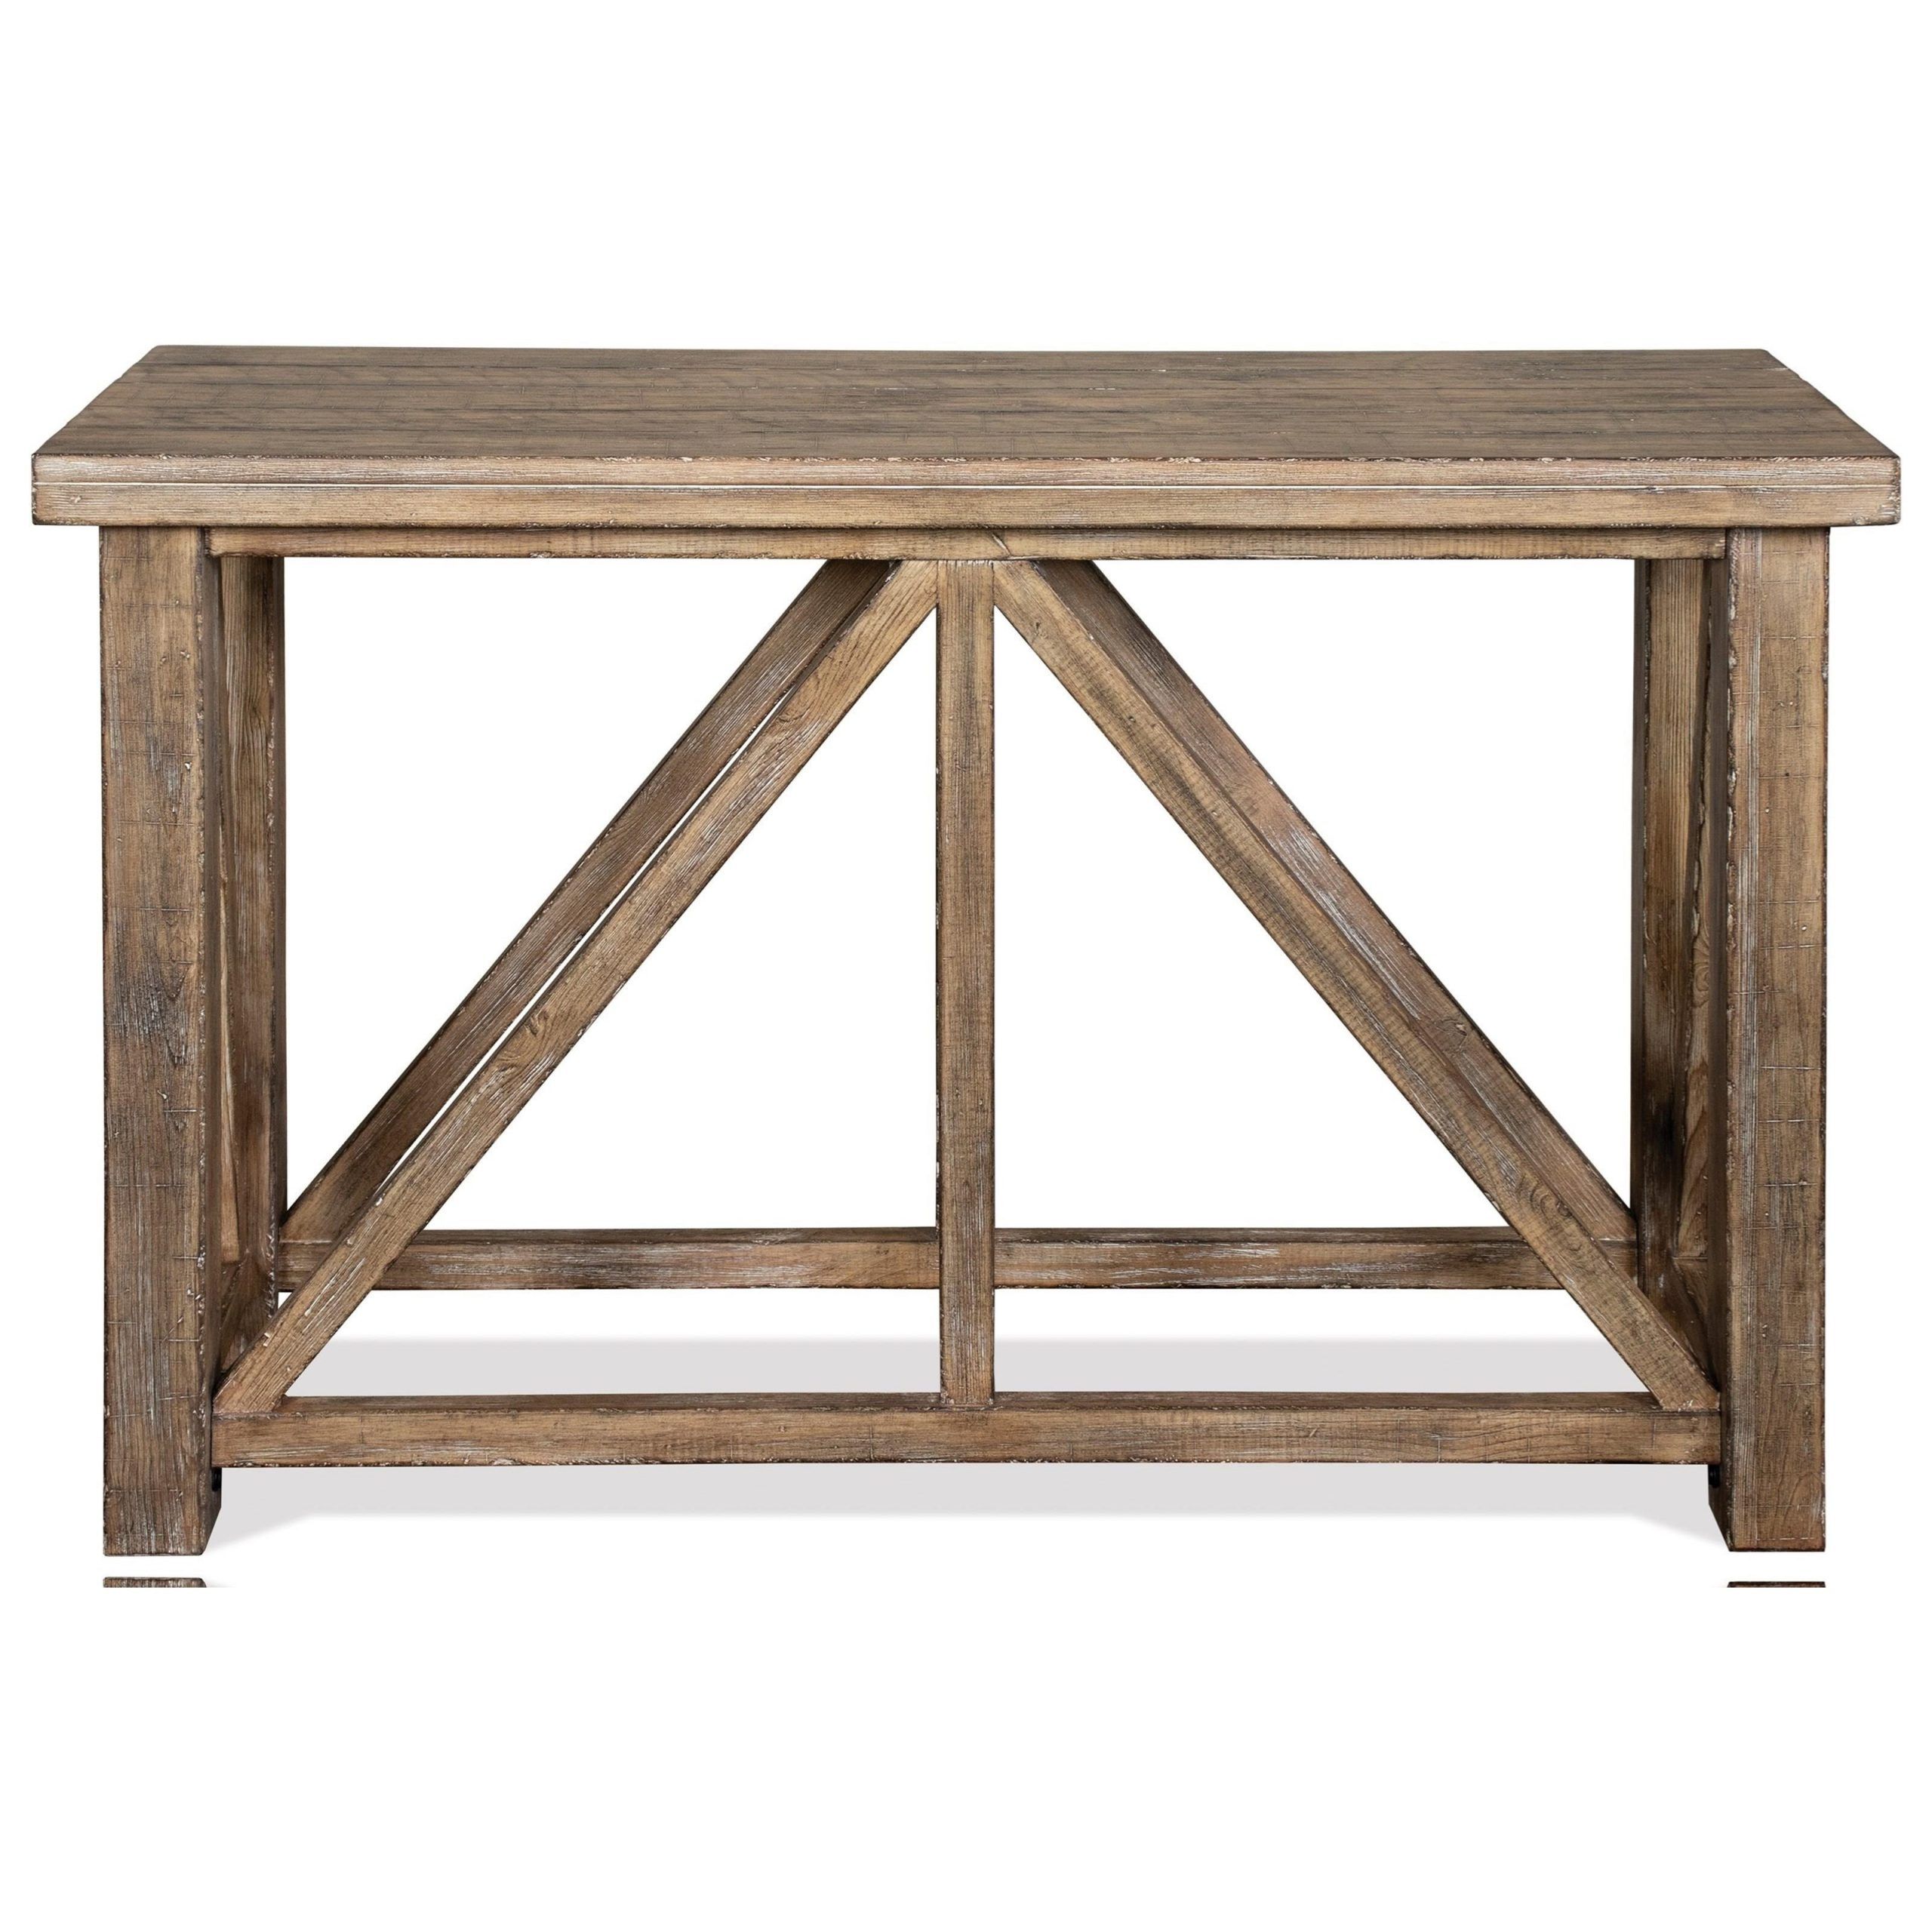 Riverside Furniture Sonora Rustic Sofa Table In Snowy With Rustic Bronze Patina Console Tables (View 16 of 20)